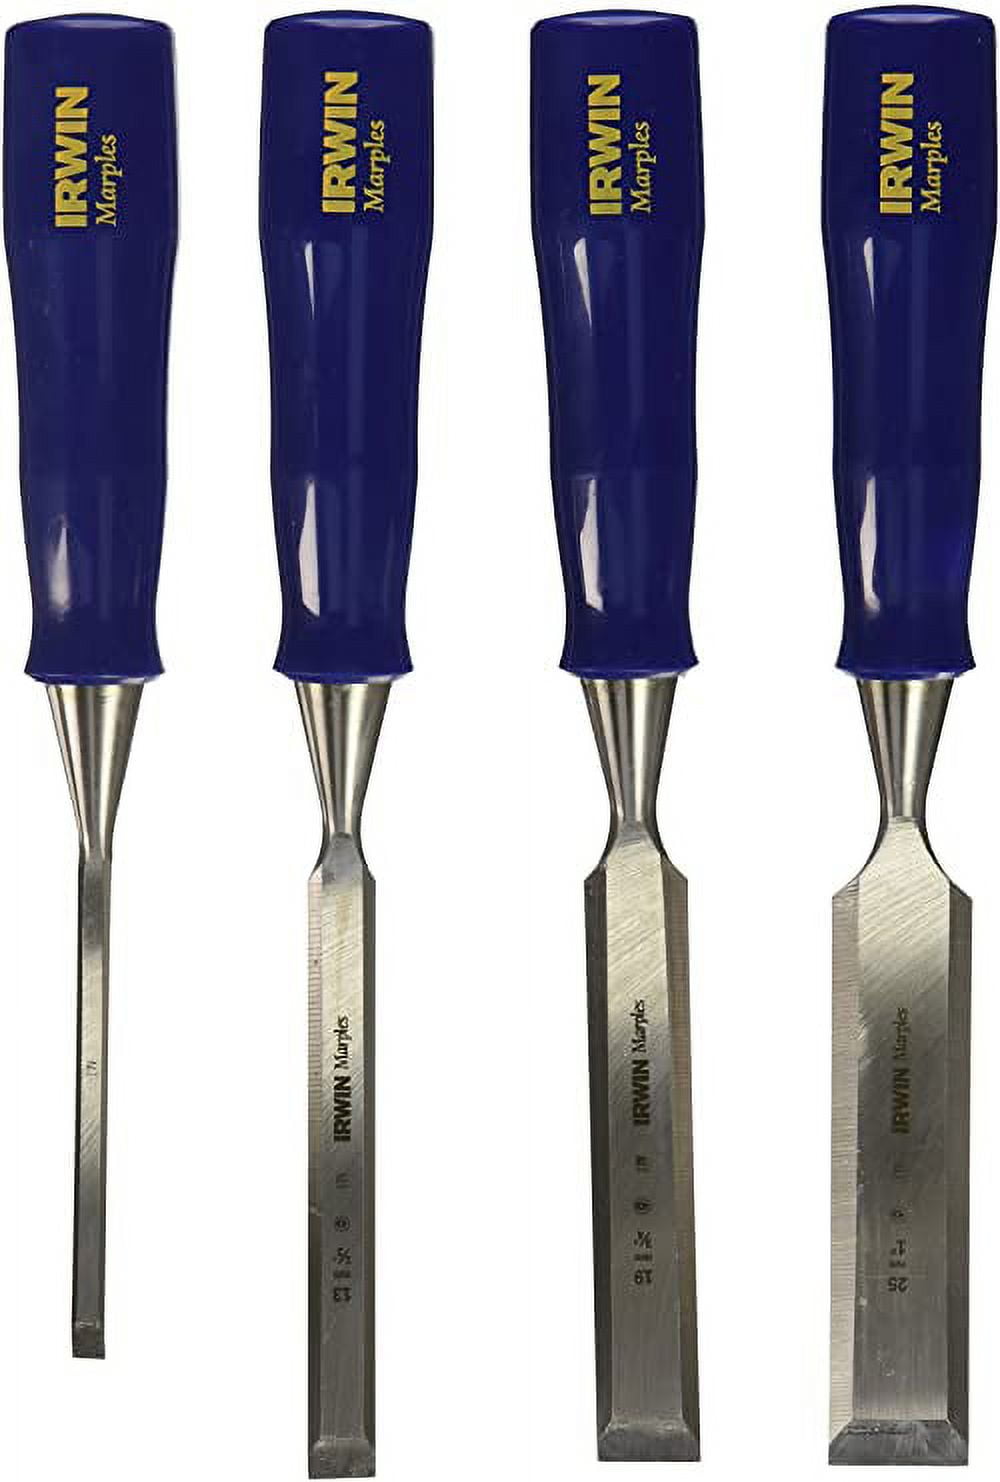 Irwin 1788114 Chisel Set for Woodworking with Mallet, 4-Piece